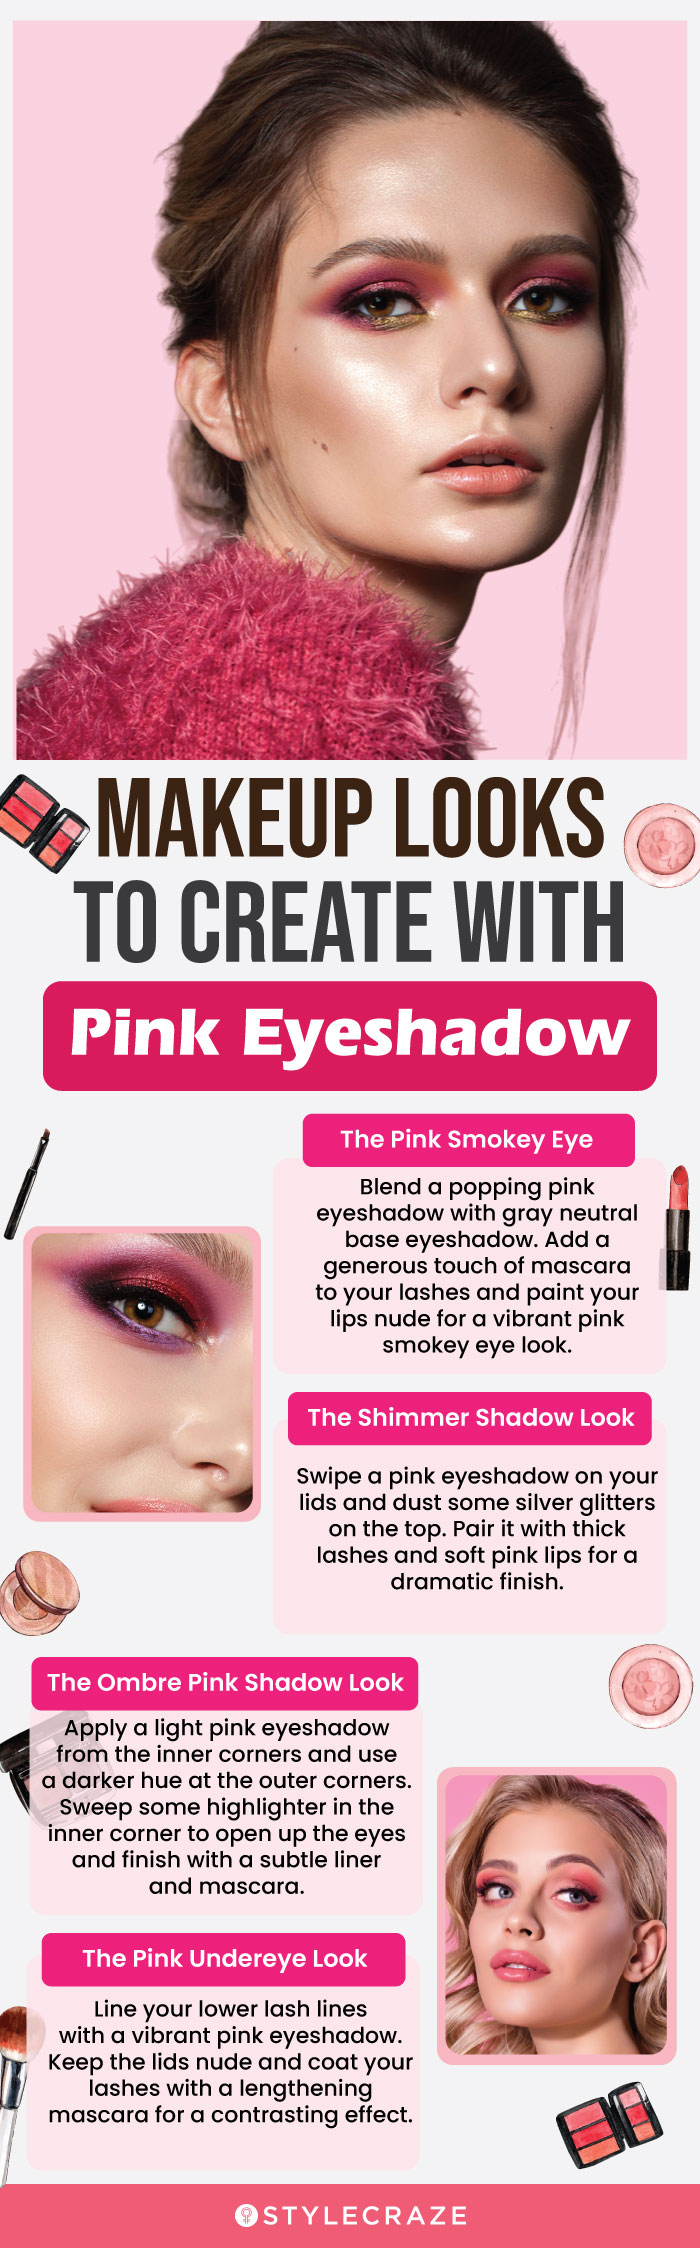 Makeup Looks To Create With Pink Eyeshadow (infographic)